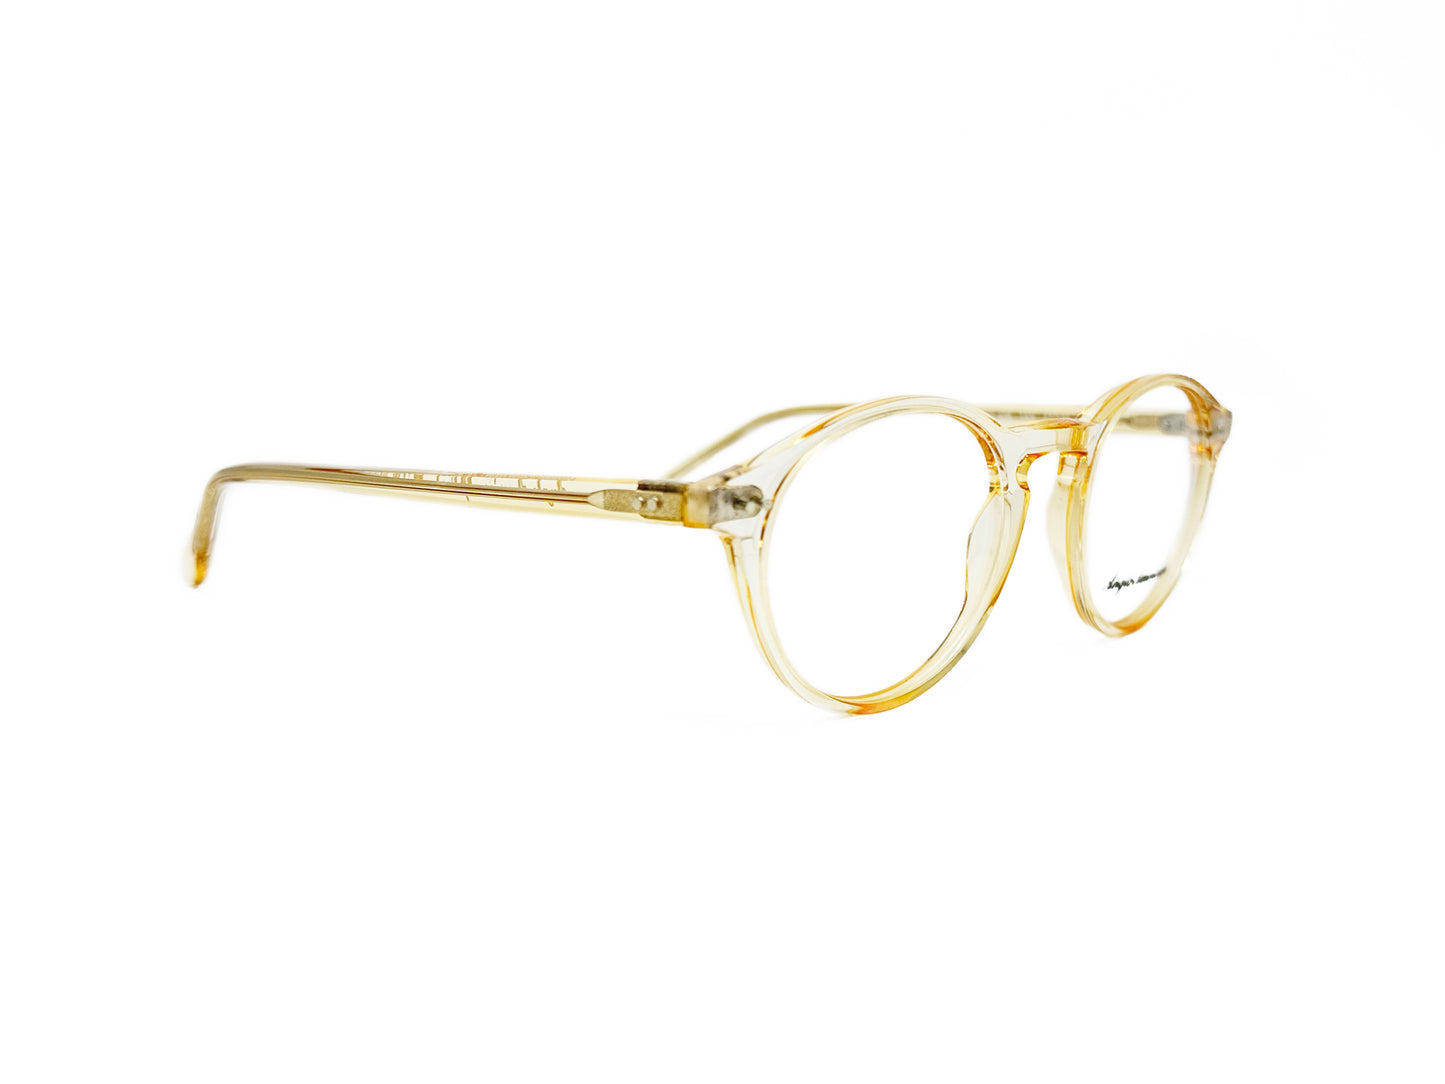 Anglo American Optical round acetate frame. Model: 406. Color: TAN - Transparent tan. Side view.